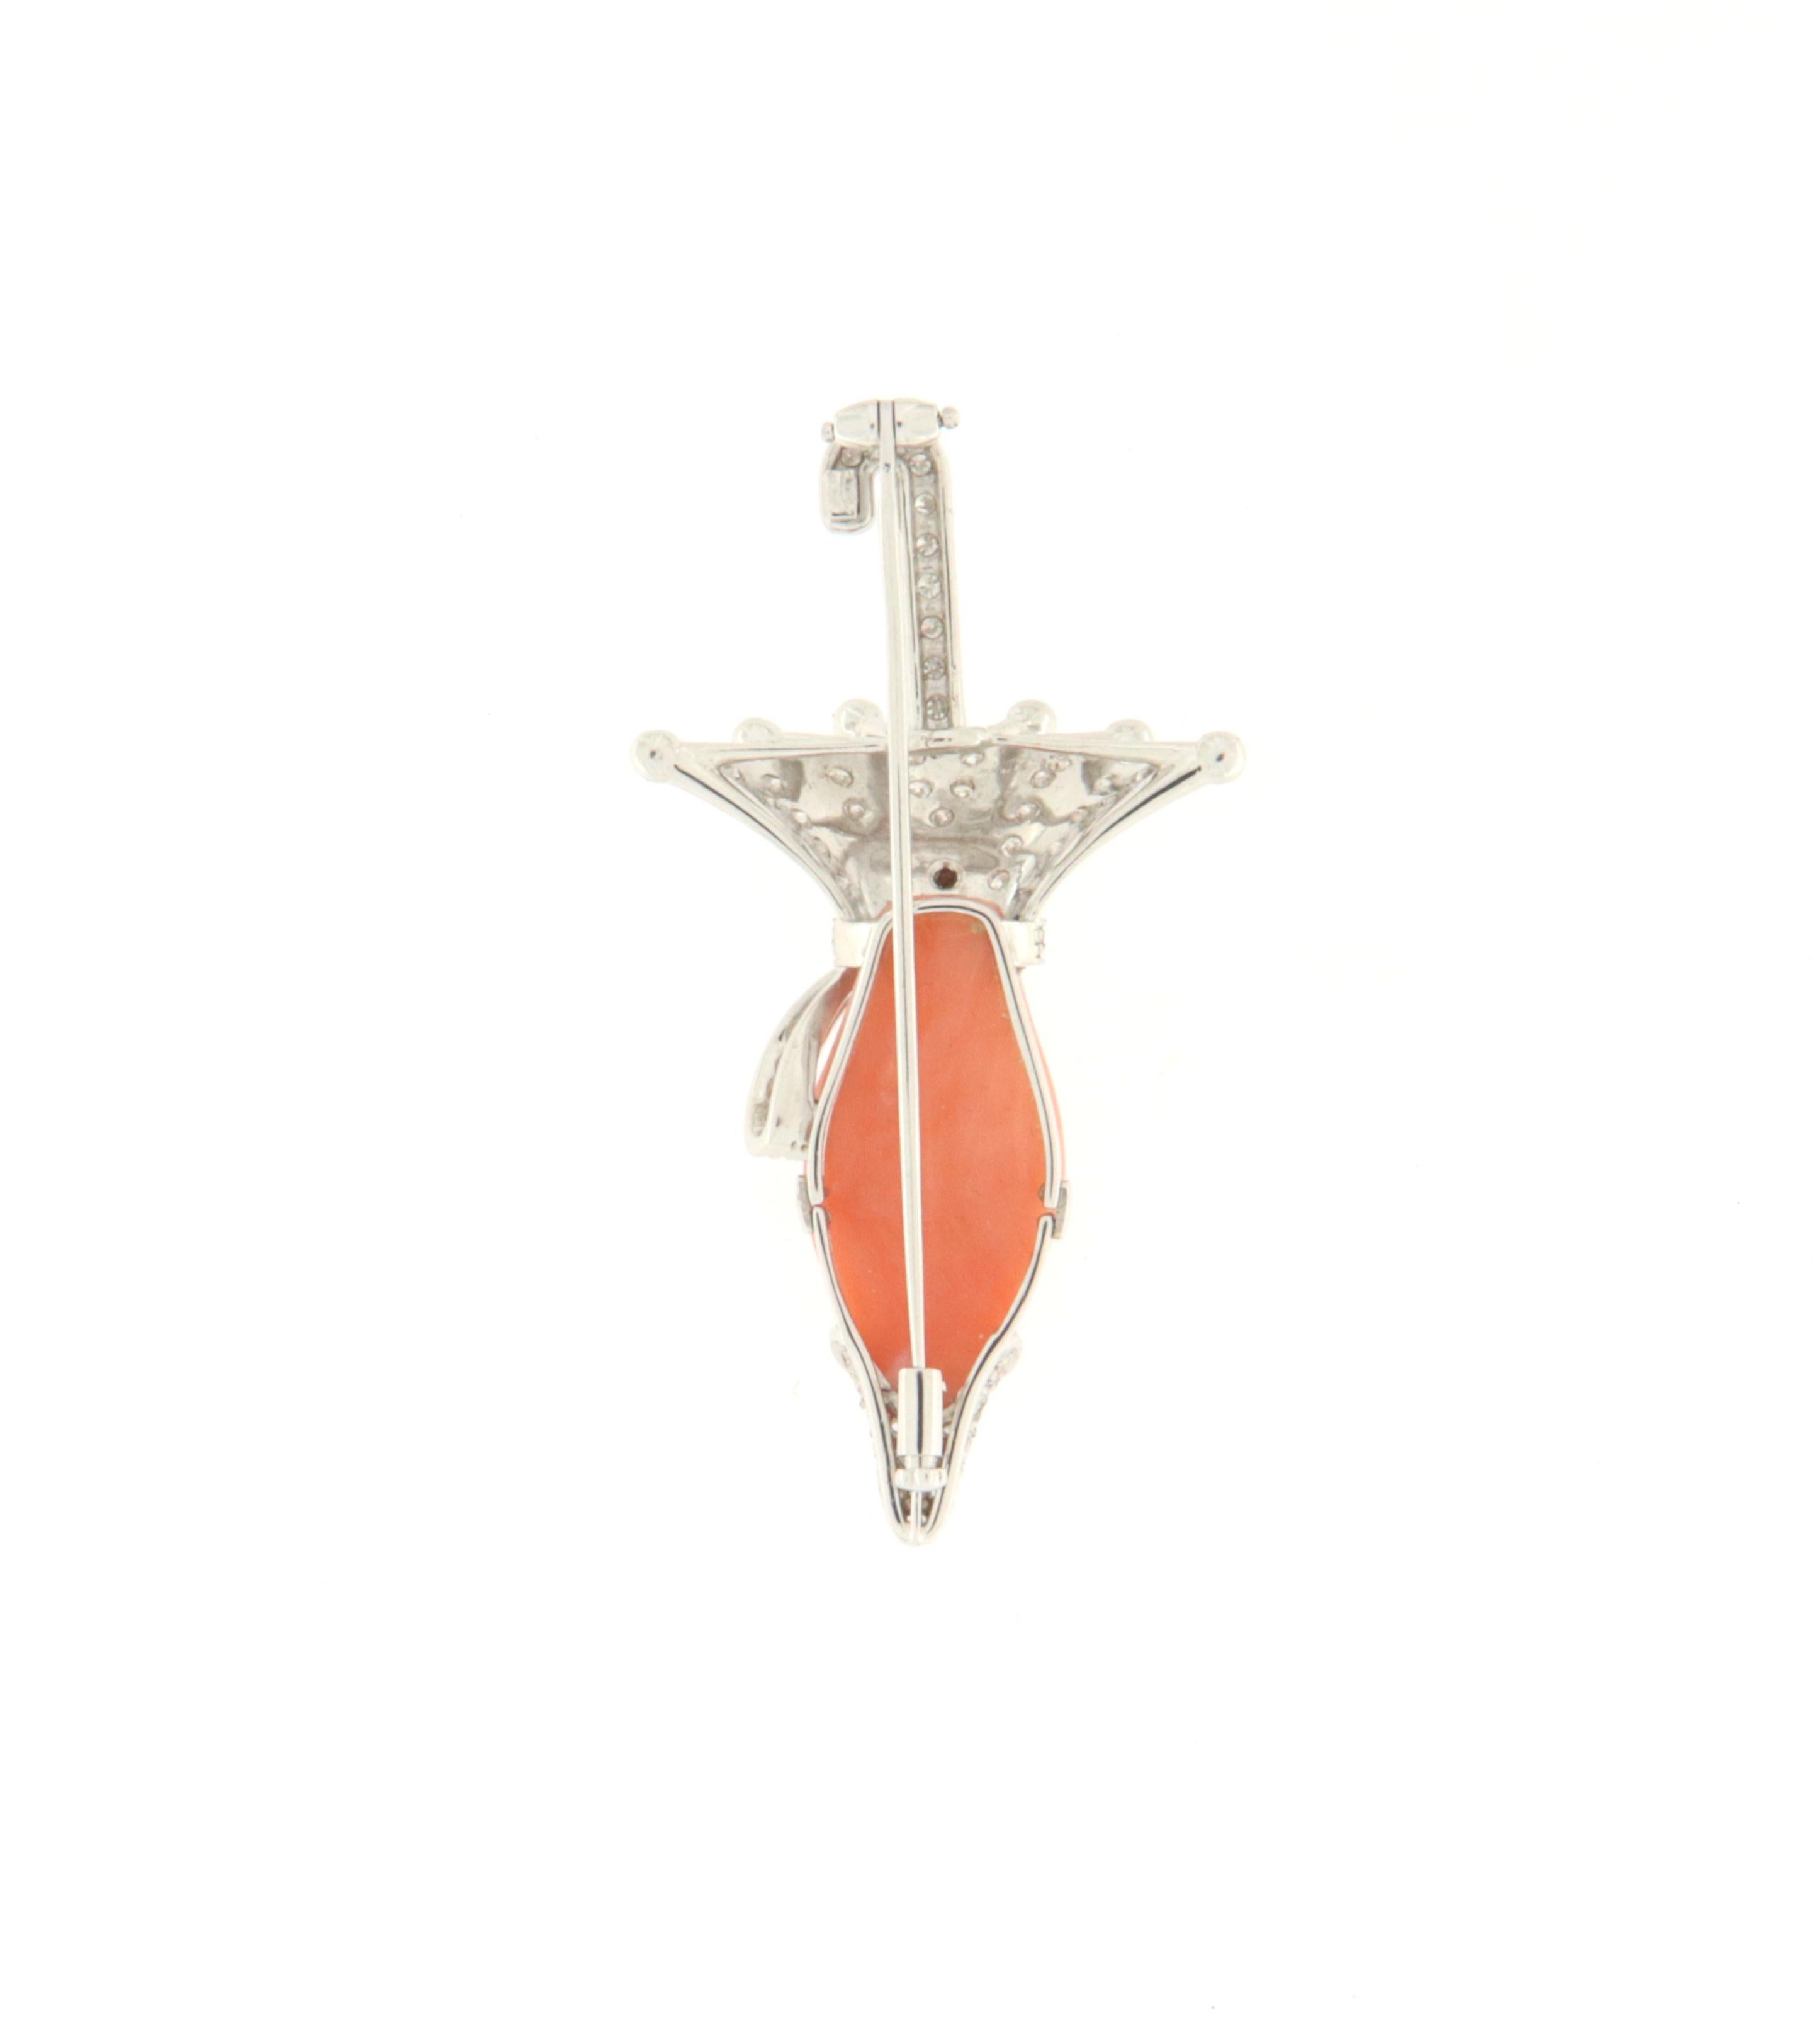 Beautiful Brooch umbrella of 18 Karat white gold and studded with natural white brilliants with one piece of coral.
The artist who created this brooch indulged himself in reproducing the umbrella using one very simple engraved coral ovals as the